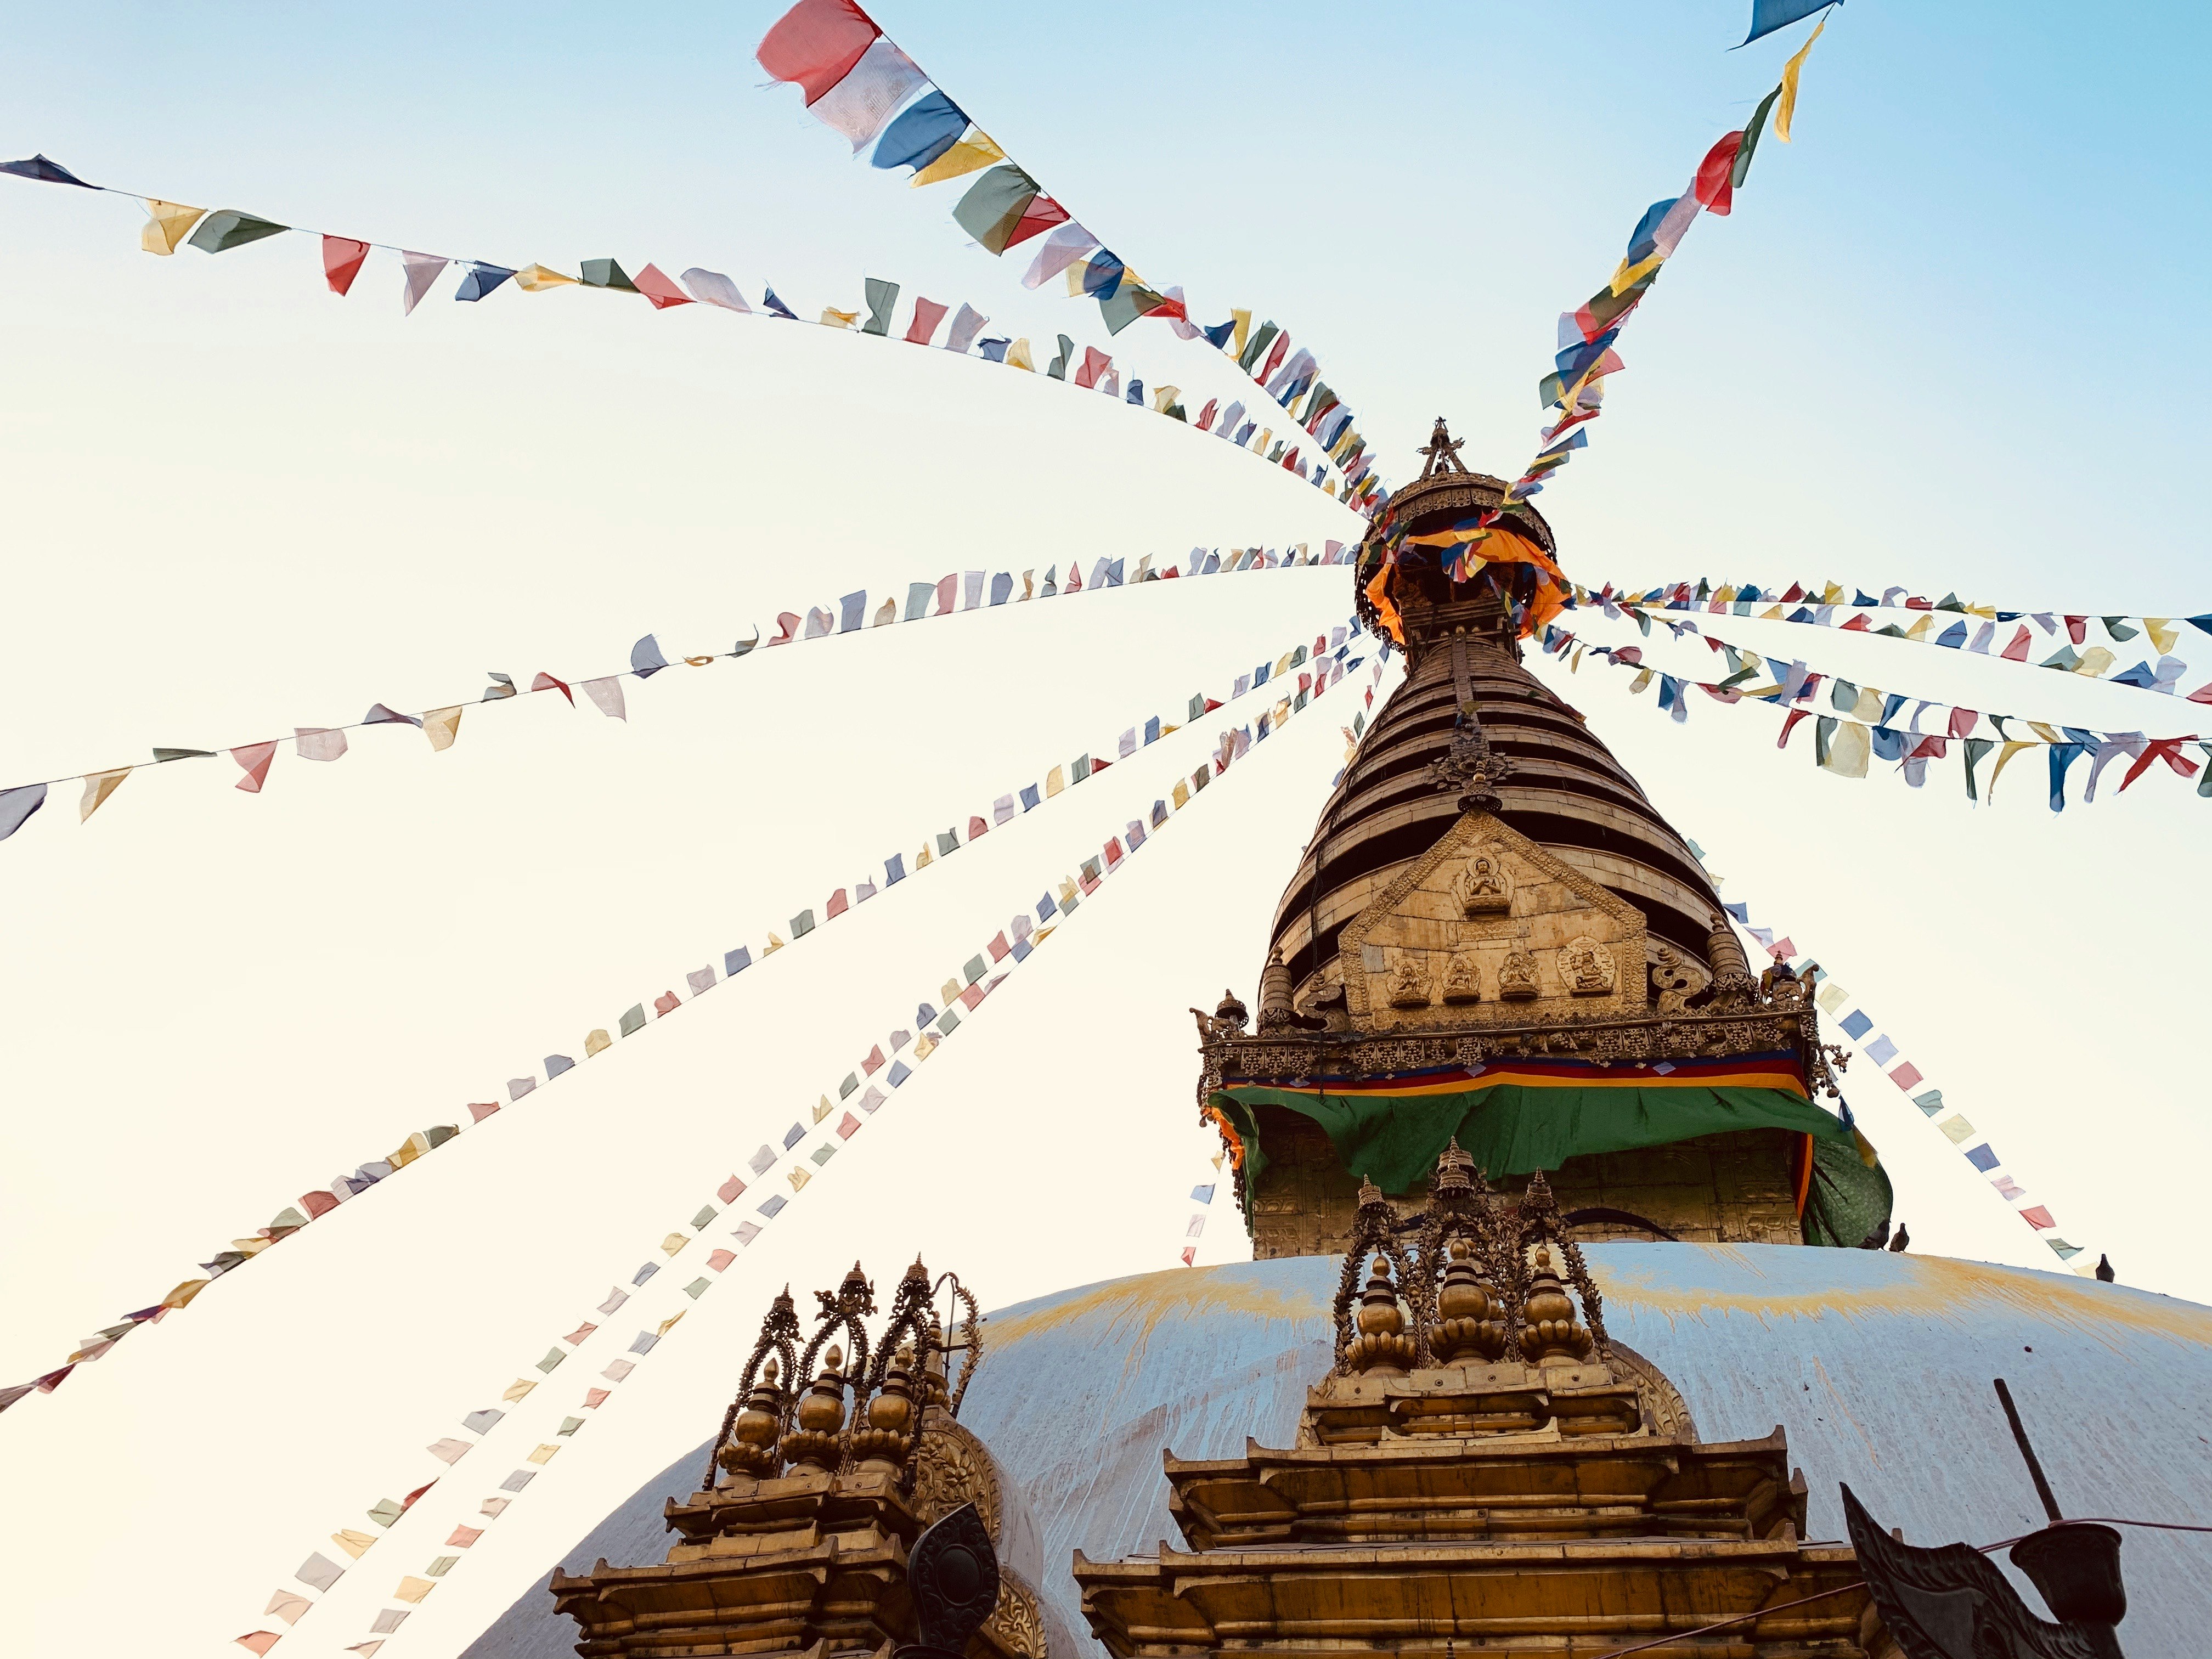 The Monkey Temple in Kathmandu is one of the greatest holy places in town. Its real name is Swayambhunath Stupa. After you climb 400 Steps to the top, you can enjoy one of the best views of the city of Kathmandu. On the last 10 steps you get this late afternoon view of the golden Stupa and its colorful prayer flags.